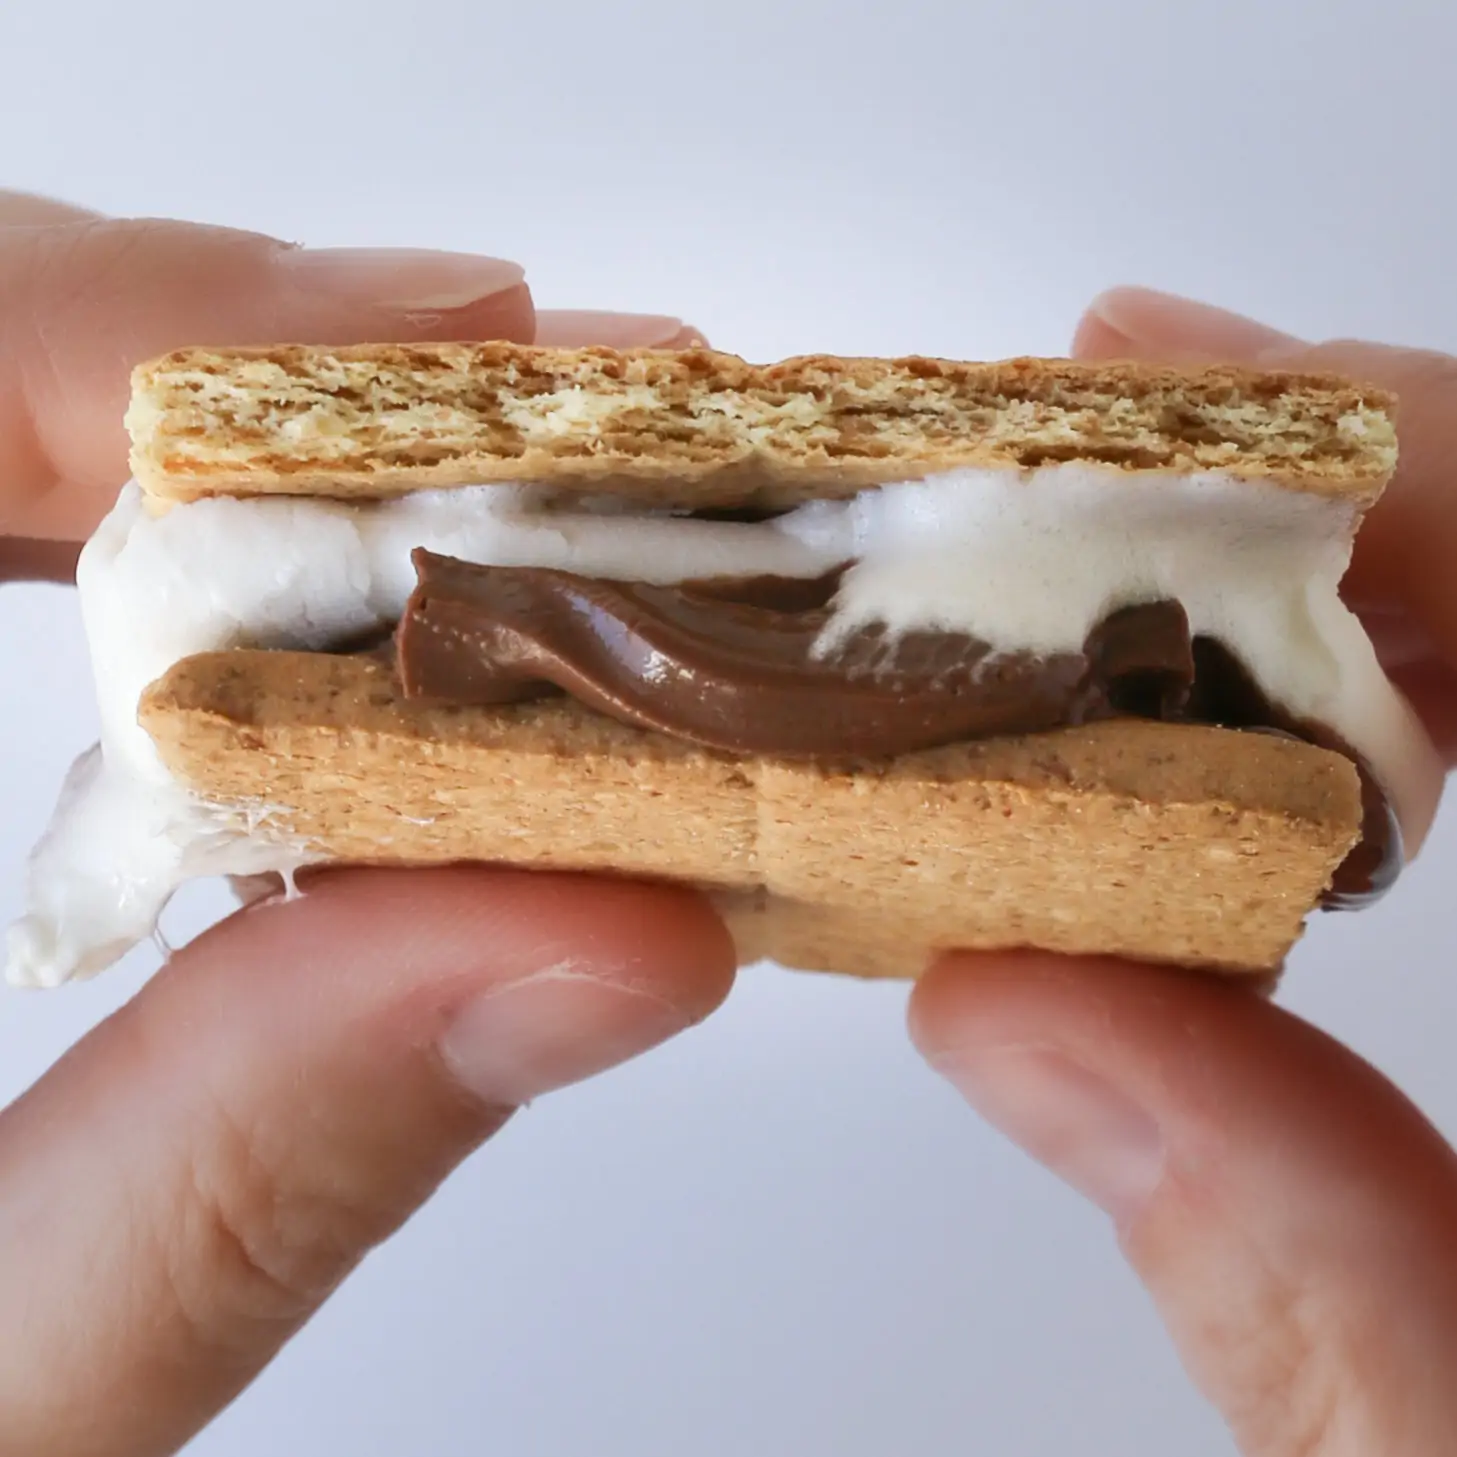 This S'mores Maker Lets You Make Gooey Treats in the Microwave